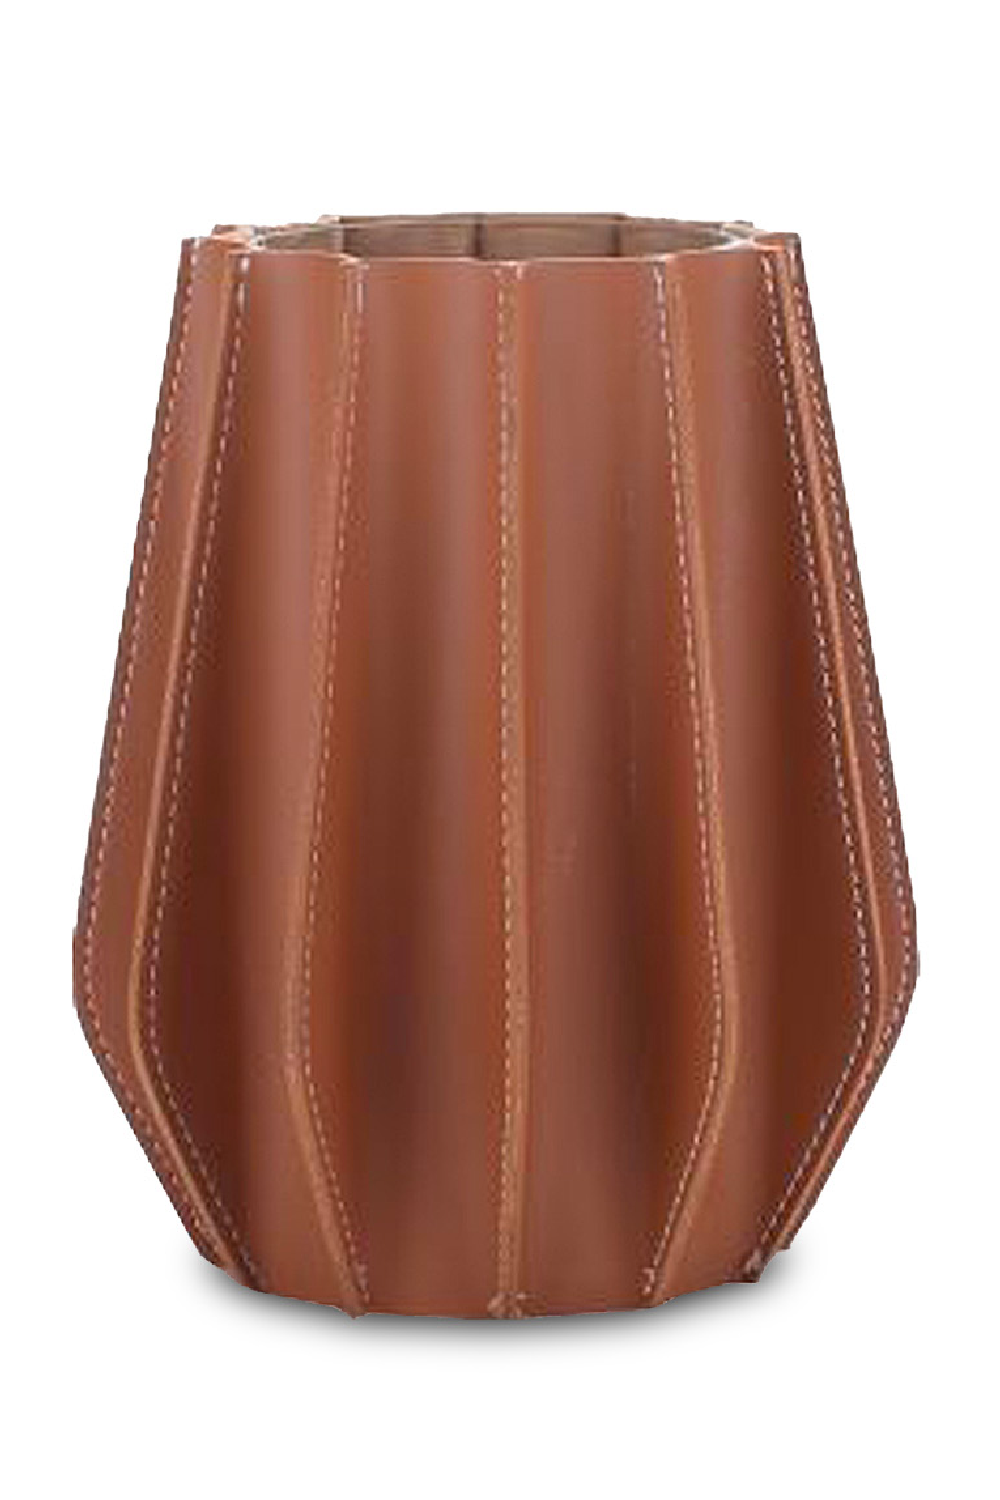 Brown Leather Fluted Vase | Liang & Eimil Juana | Oroa.com